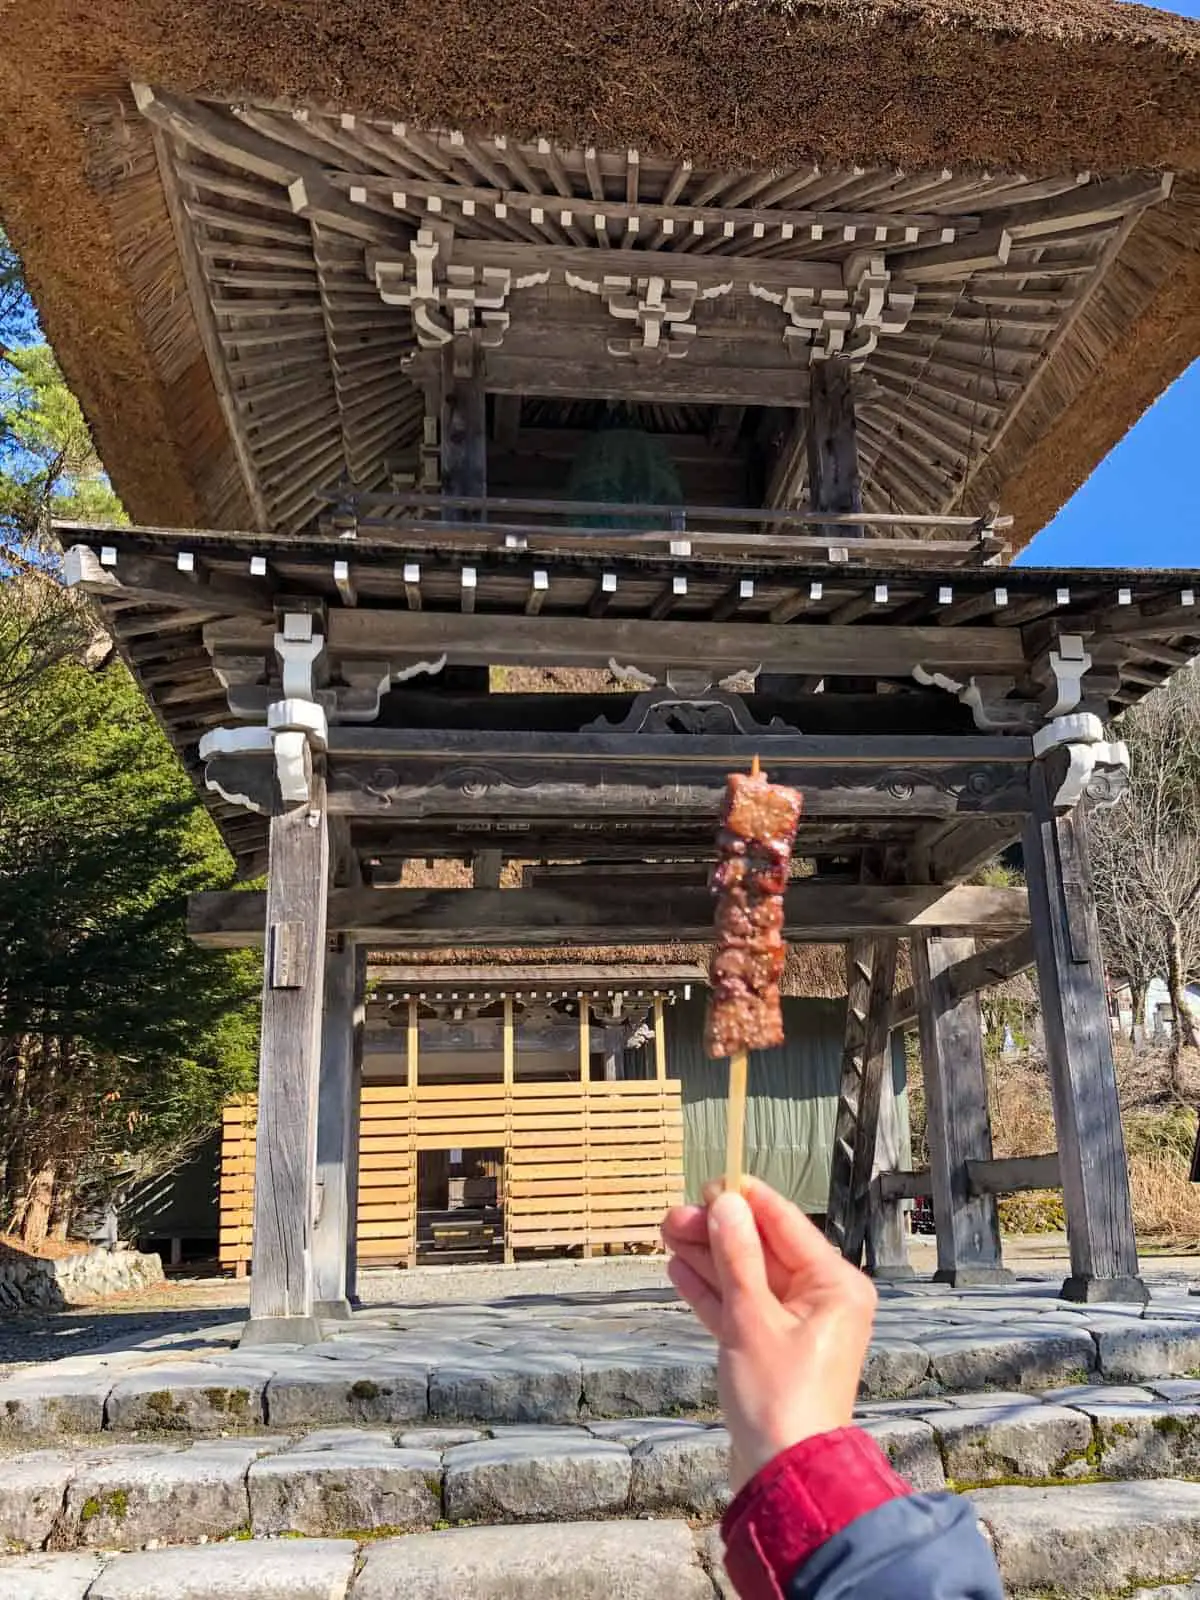 A temple in the background, and a hand holding a stick with beef skewered on it in the foreground. 